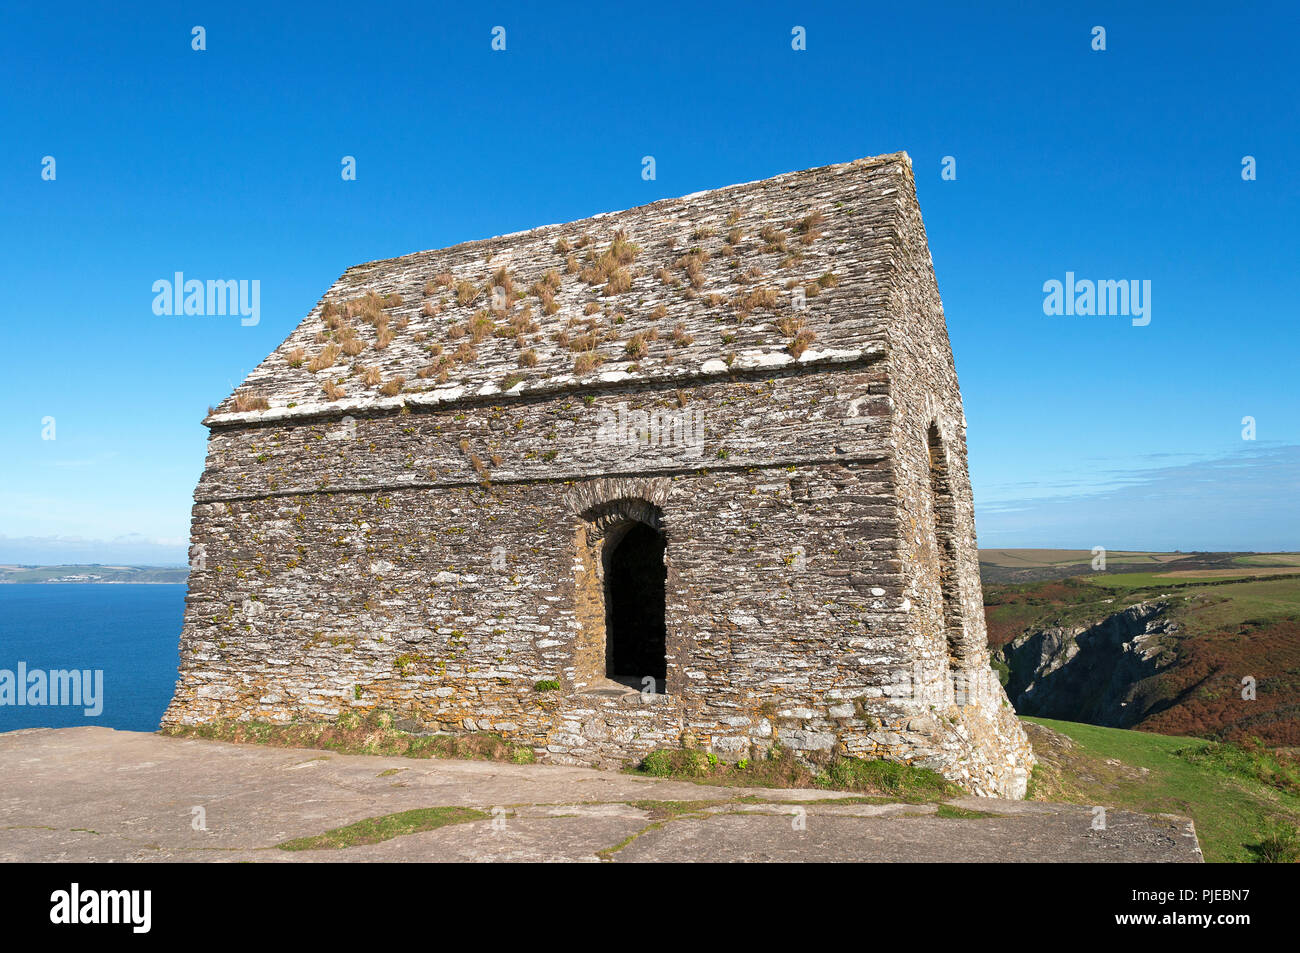 St. Michaels Chapel At Rame Head In Southeast Cornwall, England, Uk. Stock Photo